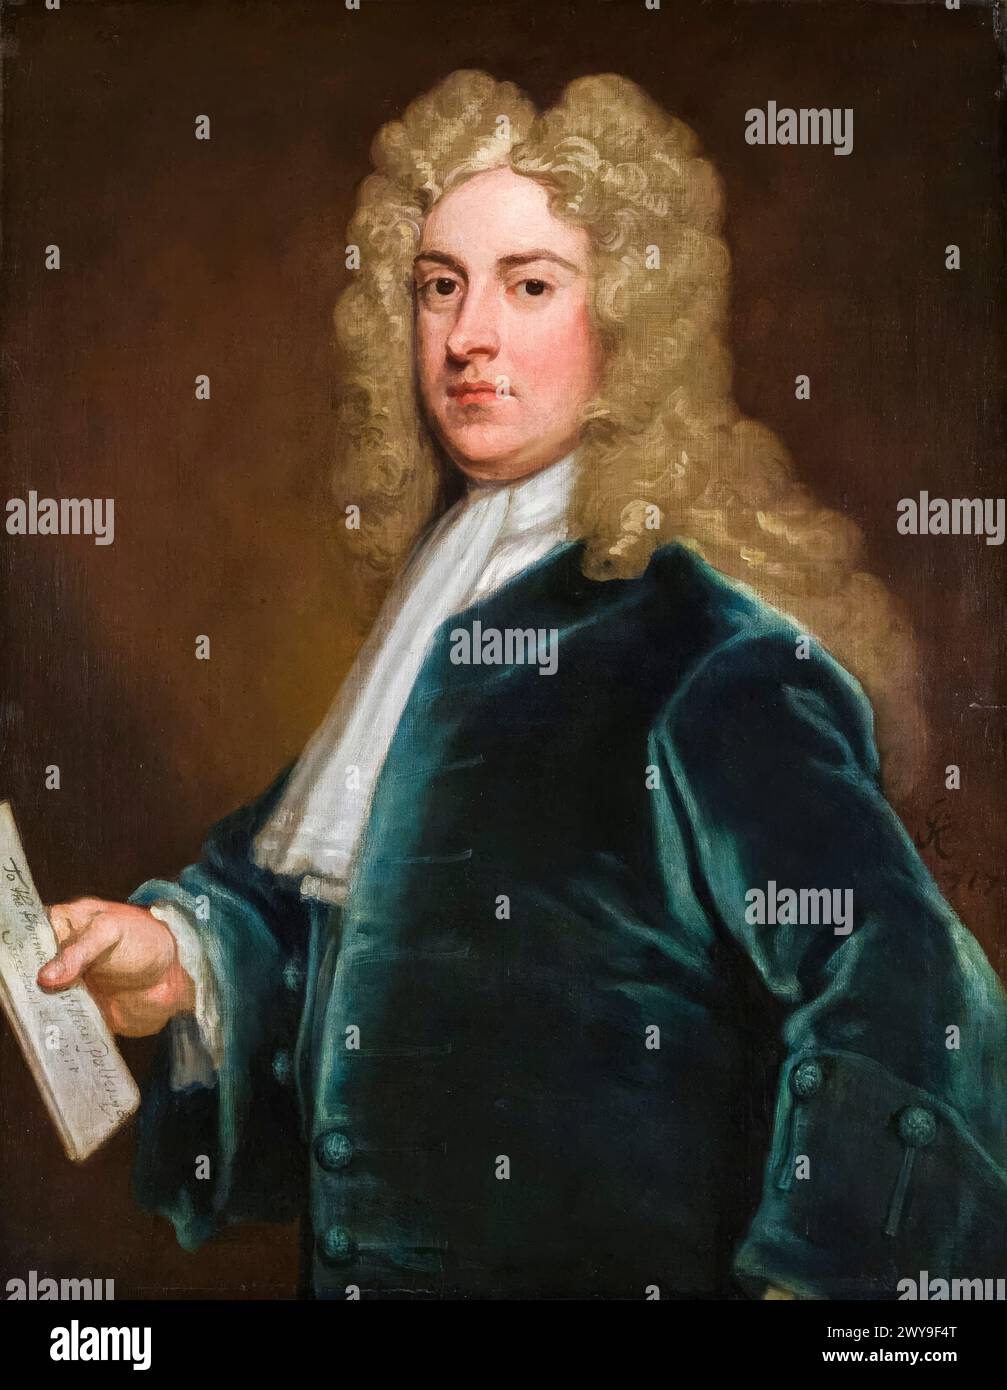 William Pulteney, 1st Earl of Bath (1684-1764), Whig politician and disputed Prime Minister of Great Britain 10-12 February 1746, portrait painting in oil on canvas by Sir Godfrey Kneller, 1717 Stock Photo